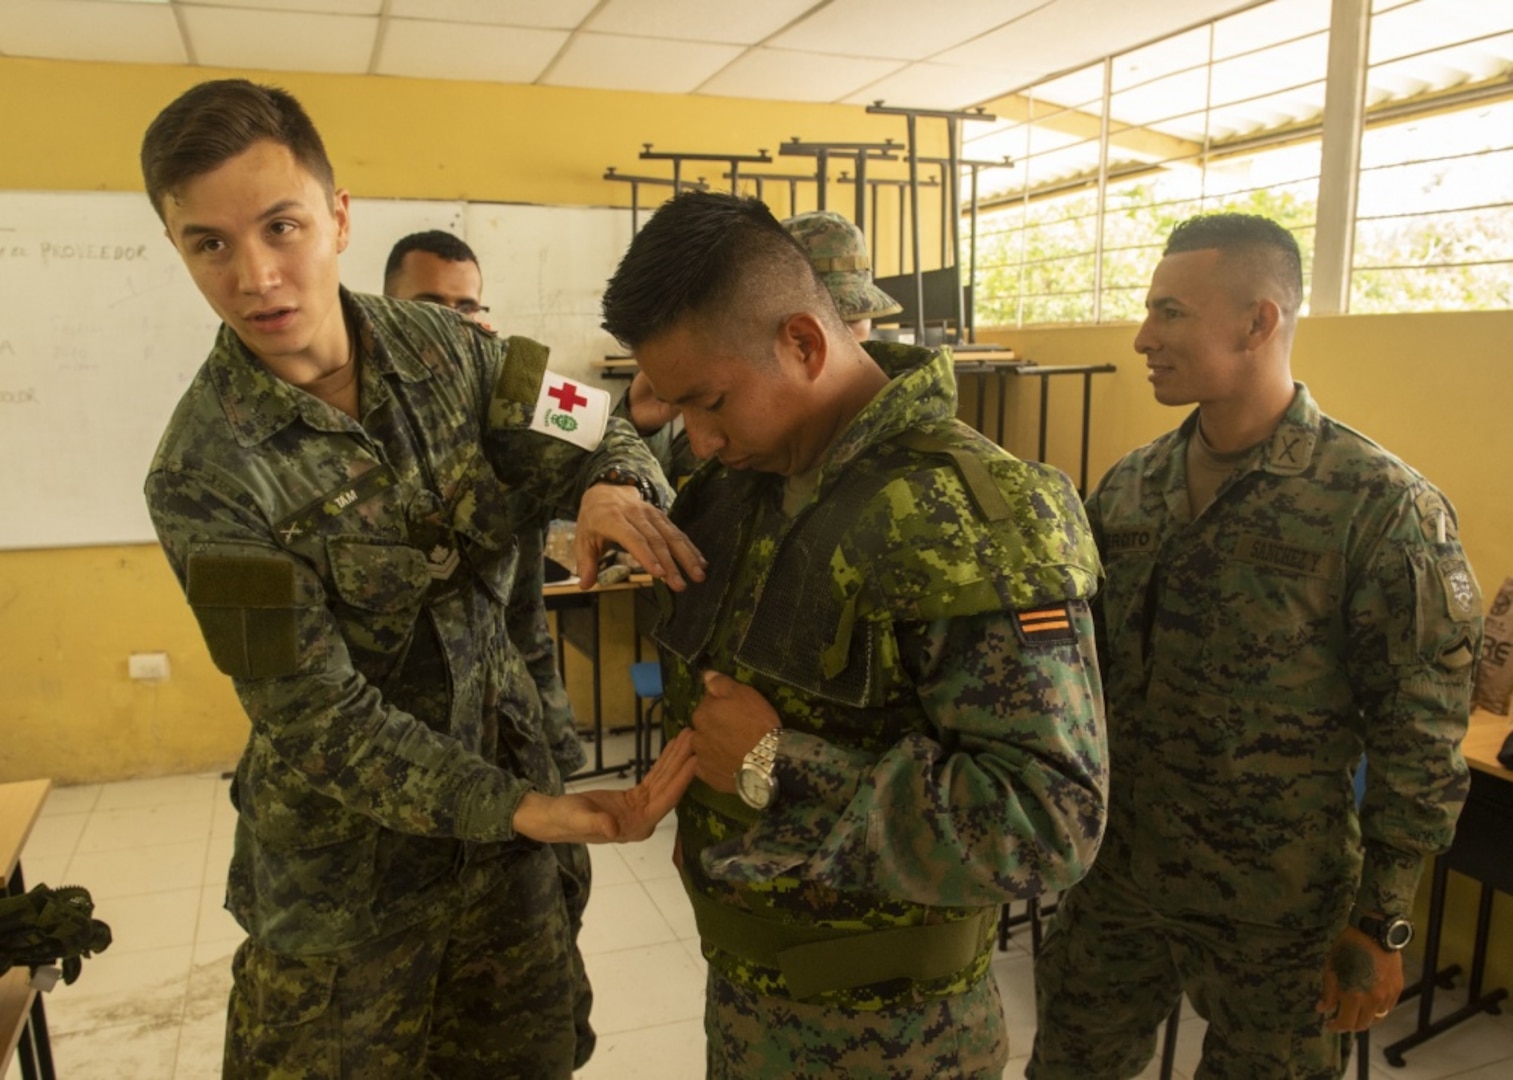 Canadian Forces Master Corporal Kristian Tam, discusses field medicine techniques during a multi-nation information exchange meeting on medicine in a tactical environment with American and Ecuadorian service members.